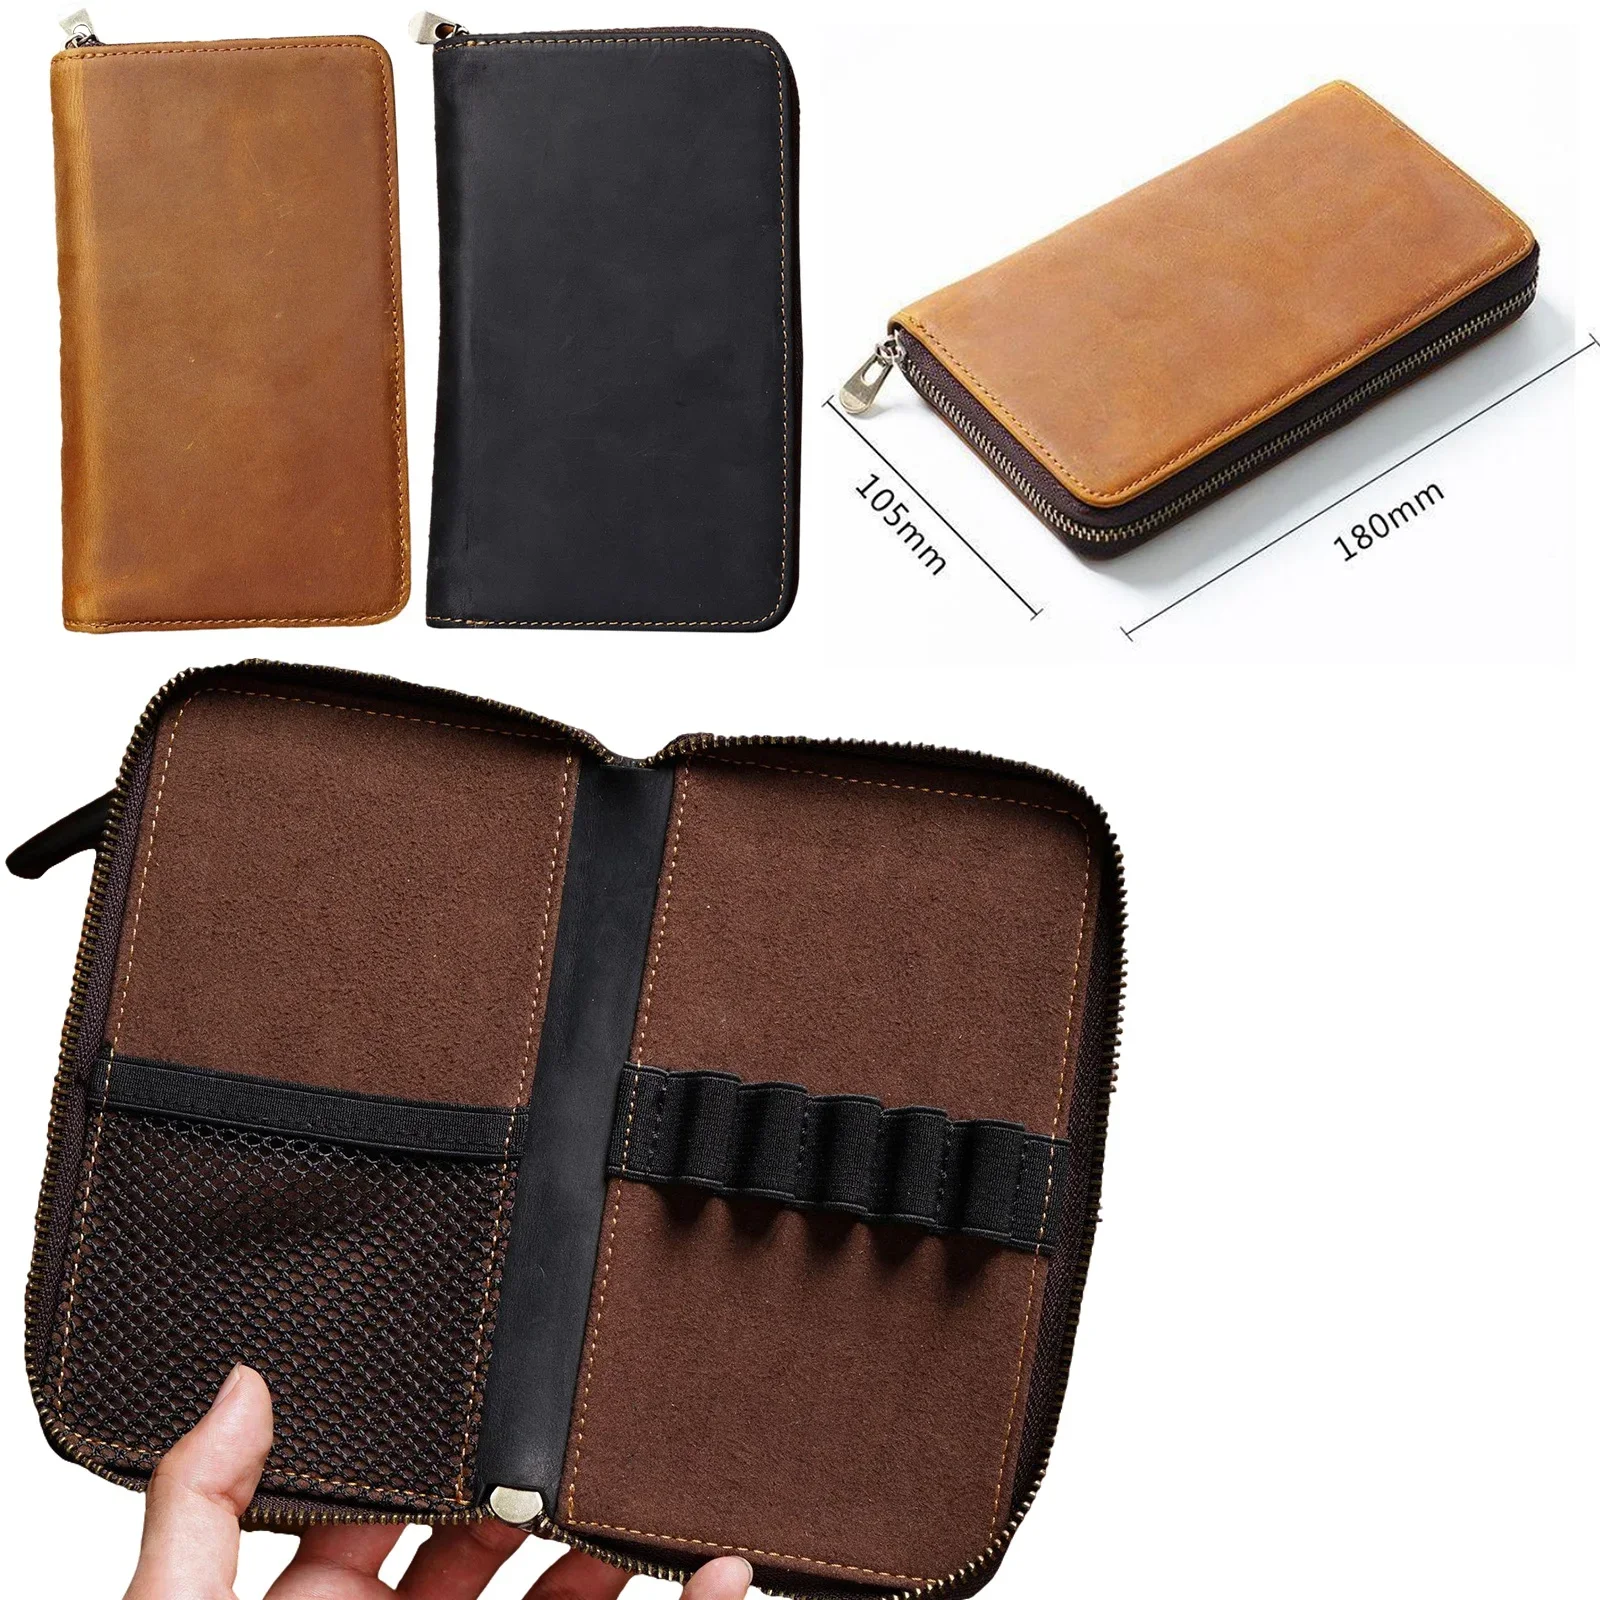 

New Pen Case with 5 Grids Zipper Closure Faux Leather pen bags Pouch for Stationery Portable Pen Holder collection Travel Pouch